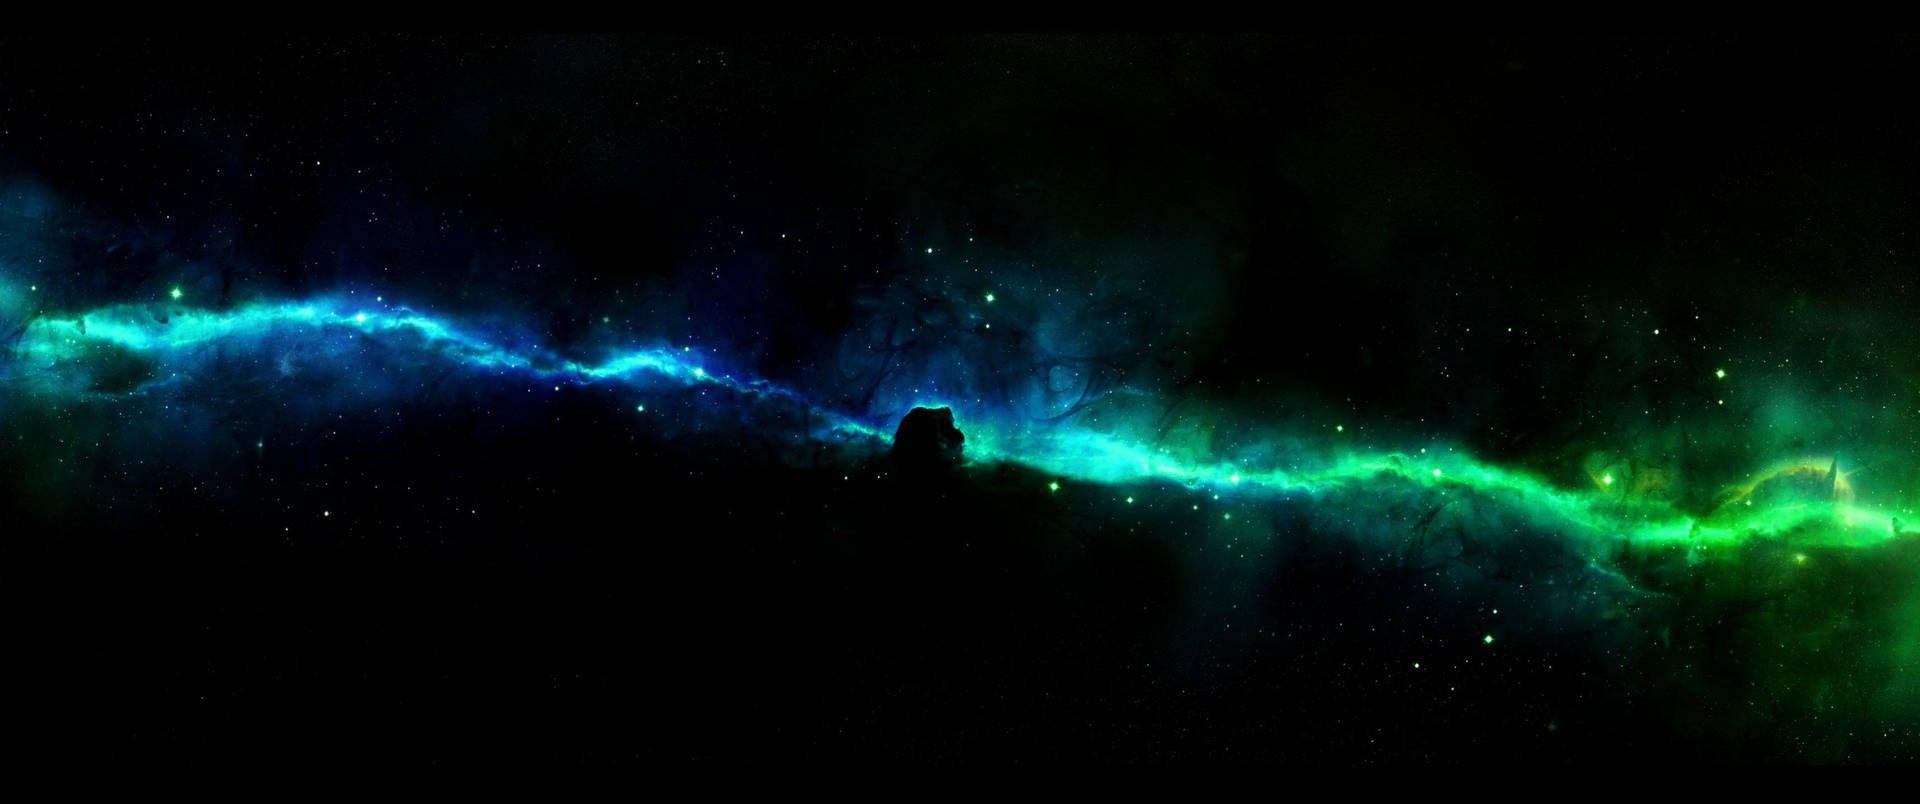 Blue and green light spreading across a galaxy wallpaper.